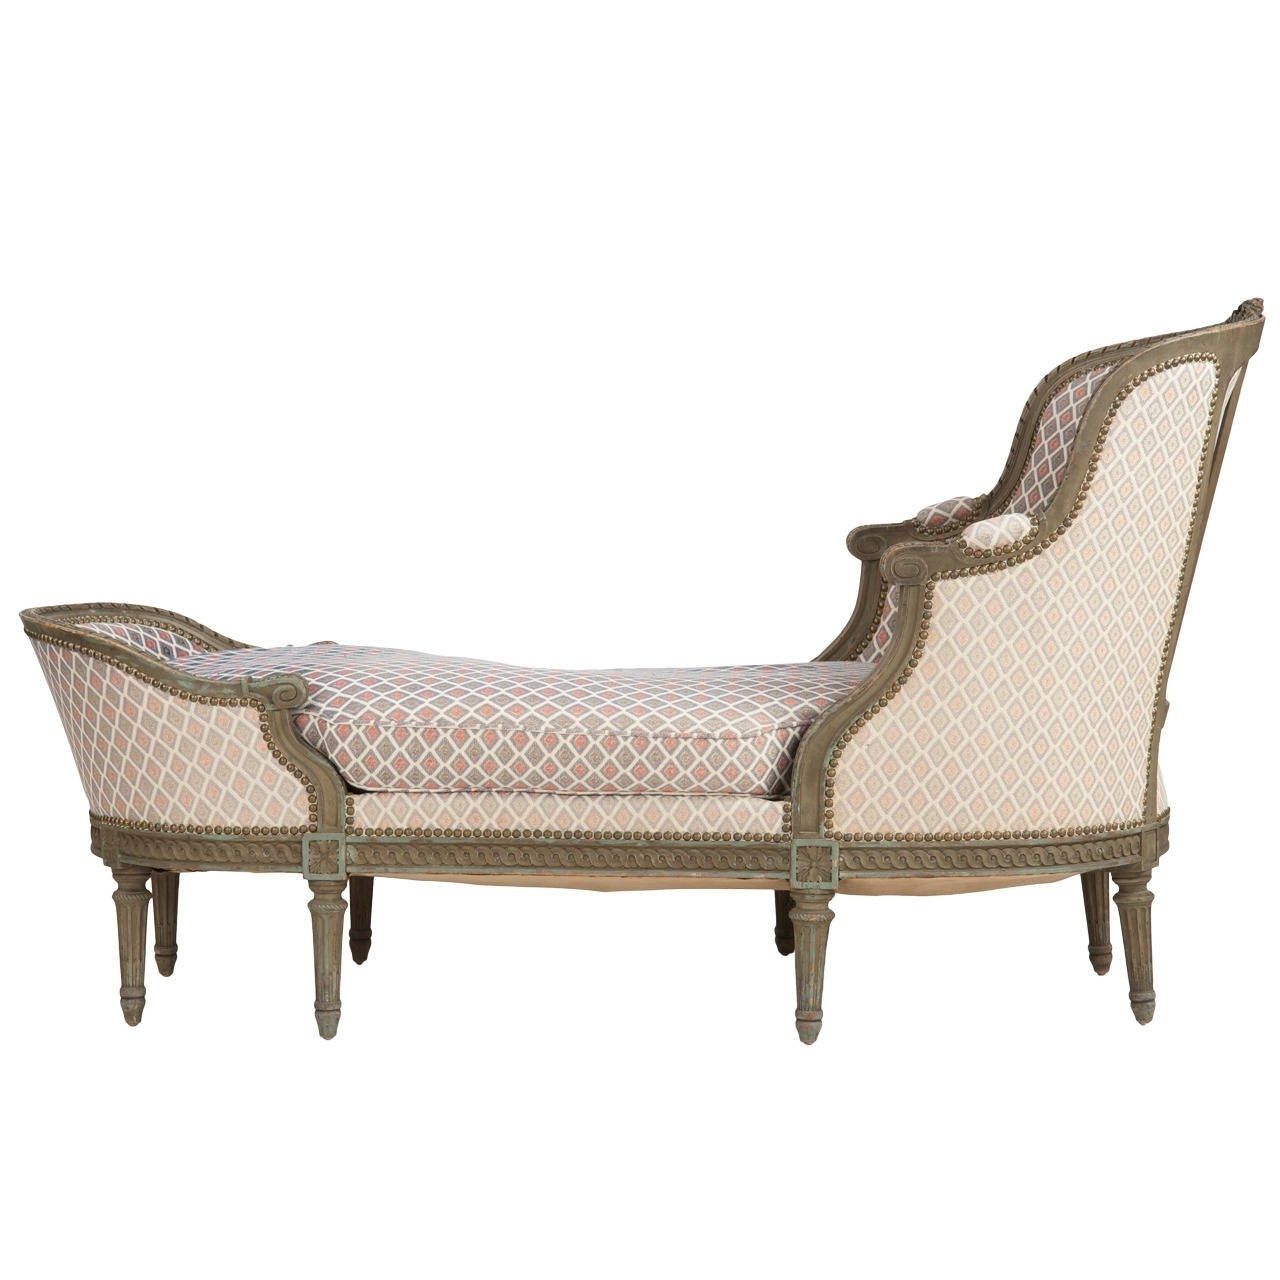 Most Popular French Louis Xvi Style Painted Antique Chaise Lounge Longue Settee Intended For Victorian Chaise Lounge Chairs (View 9 of 15)